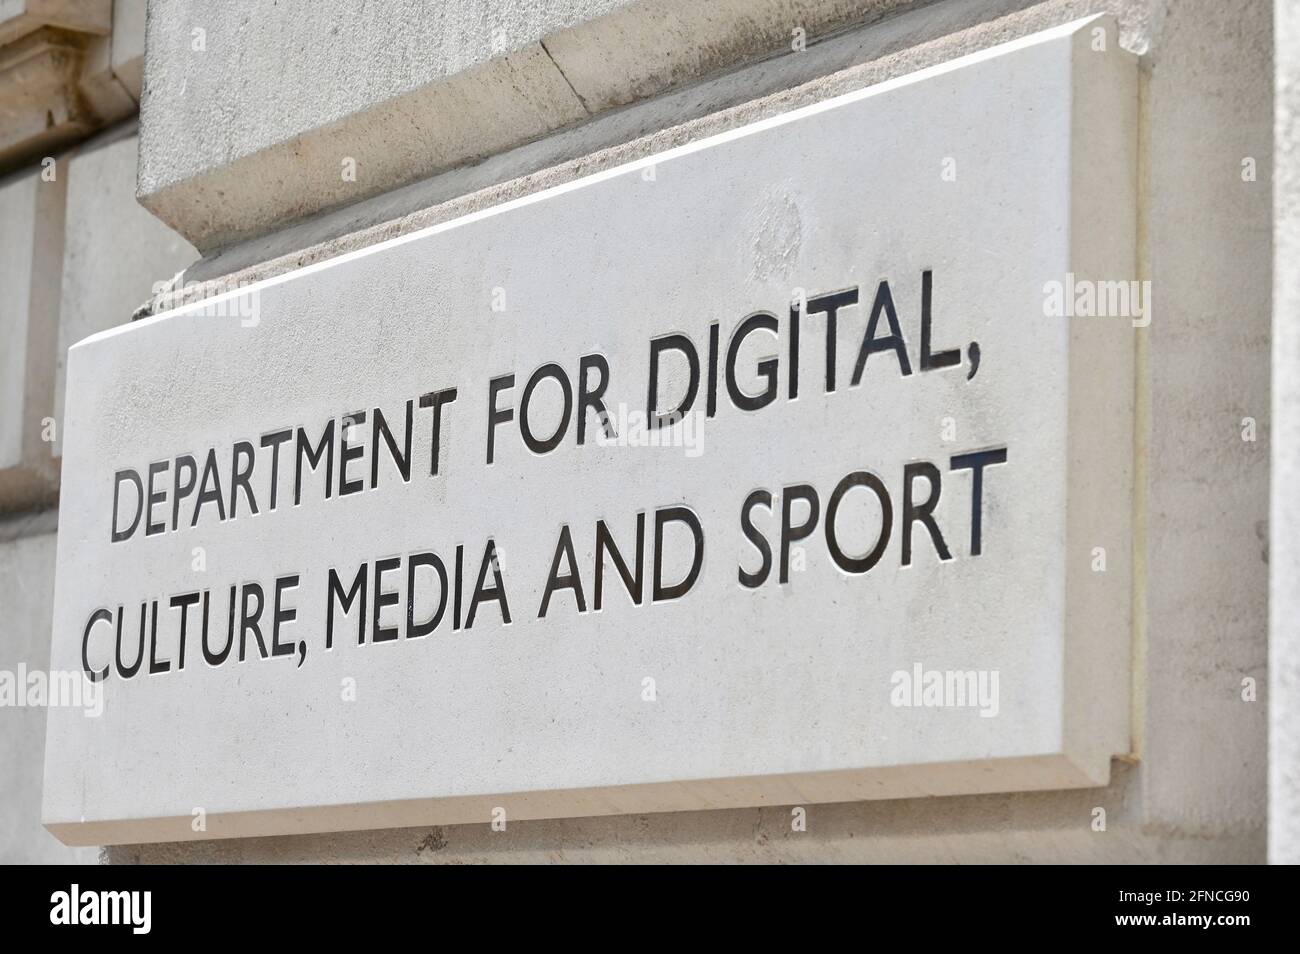 Department for Digital Culture, Media and Sport Sign, Whitehall, Londres. ROYAUME-UNI Banque D'Images